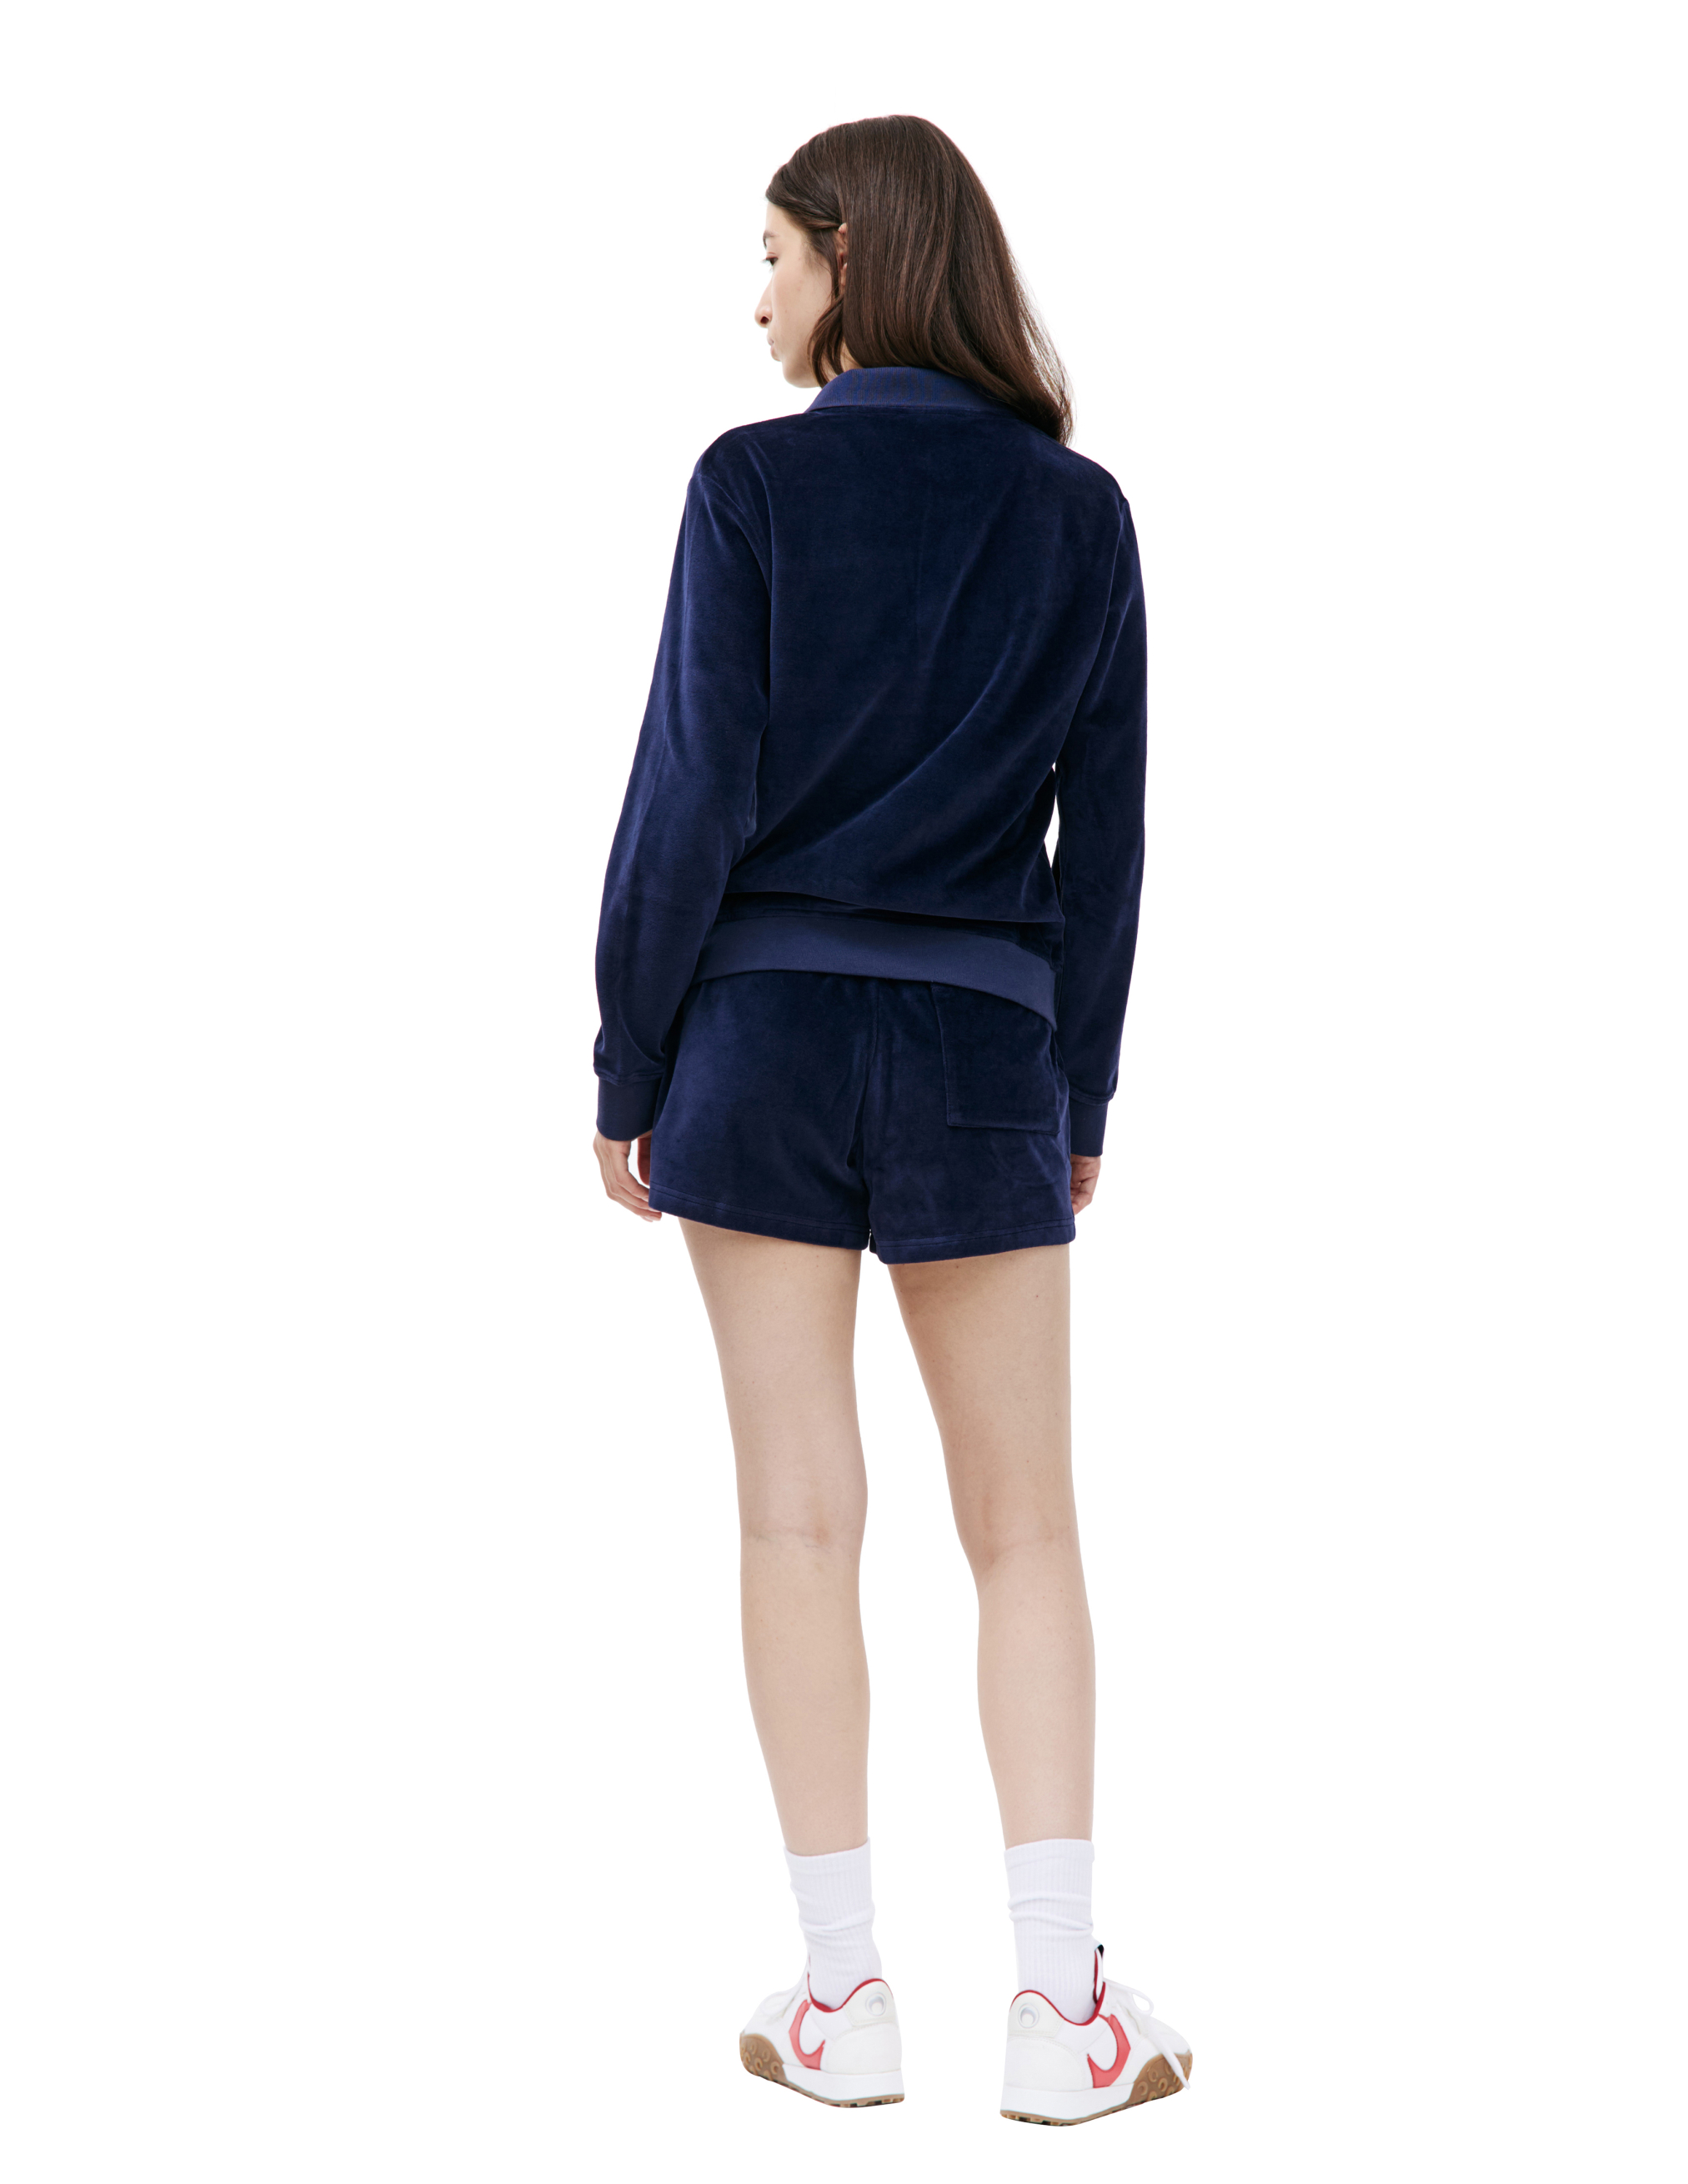 Shop Sporty And Rich Src Velour Longsleeve Polo In Navy Blue